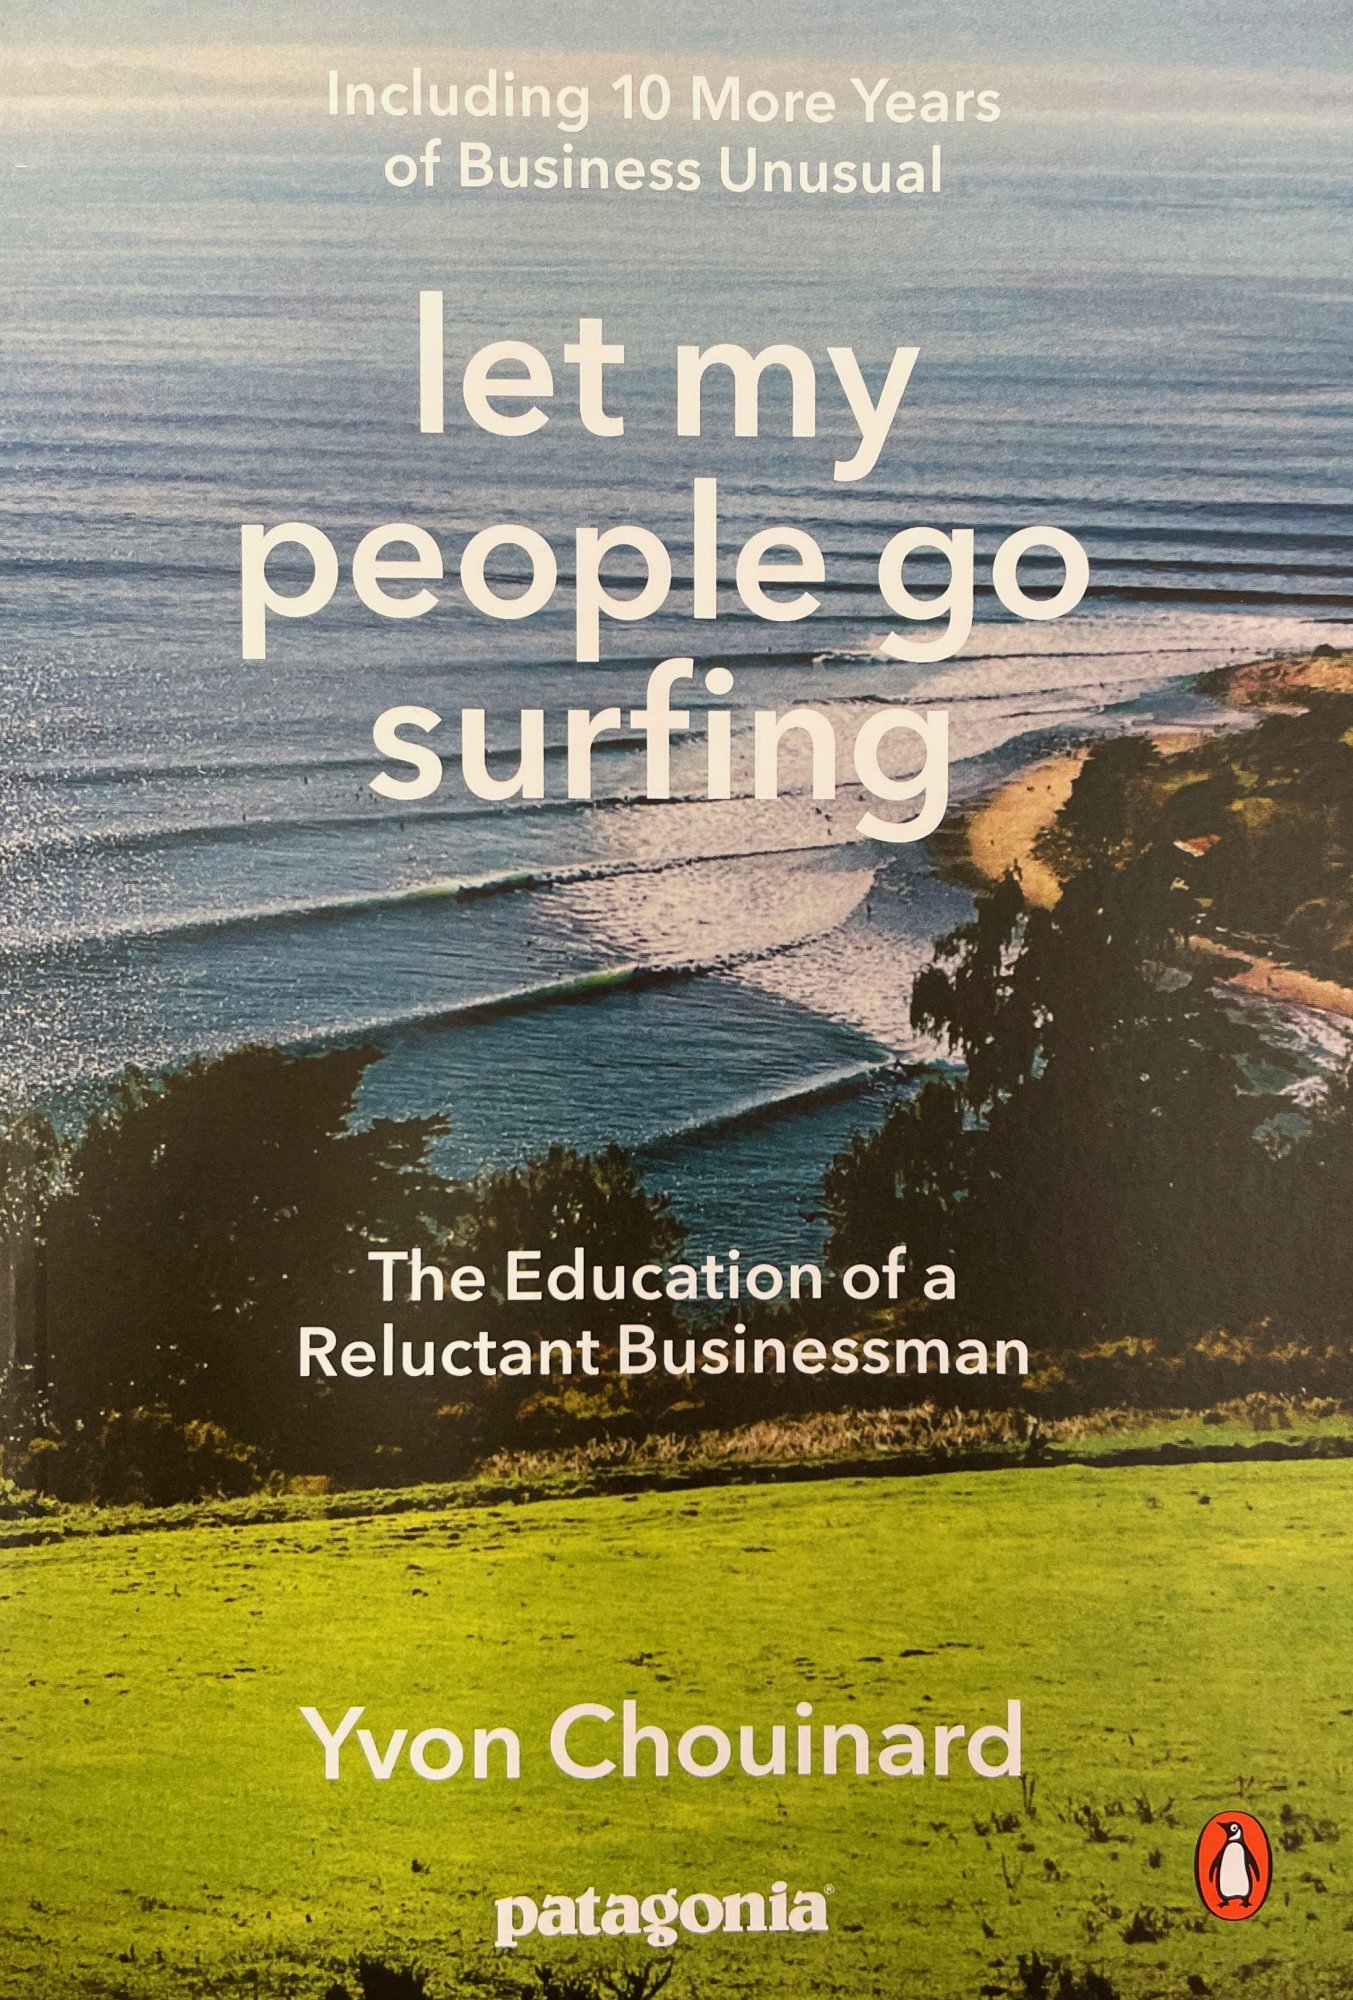 Let My People Go Surfing - The Education of a Reluctant Businessman